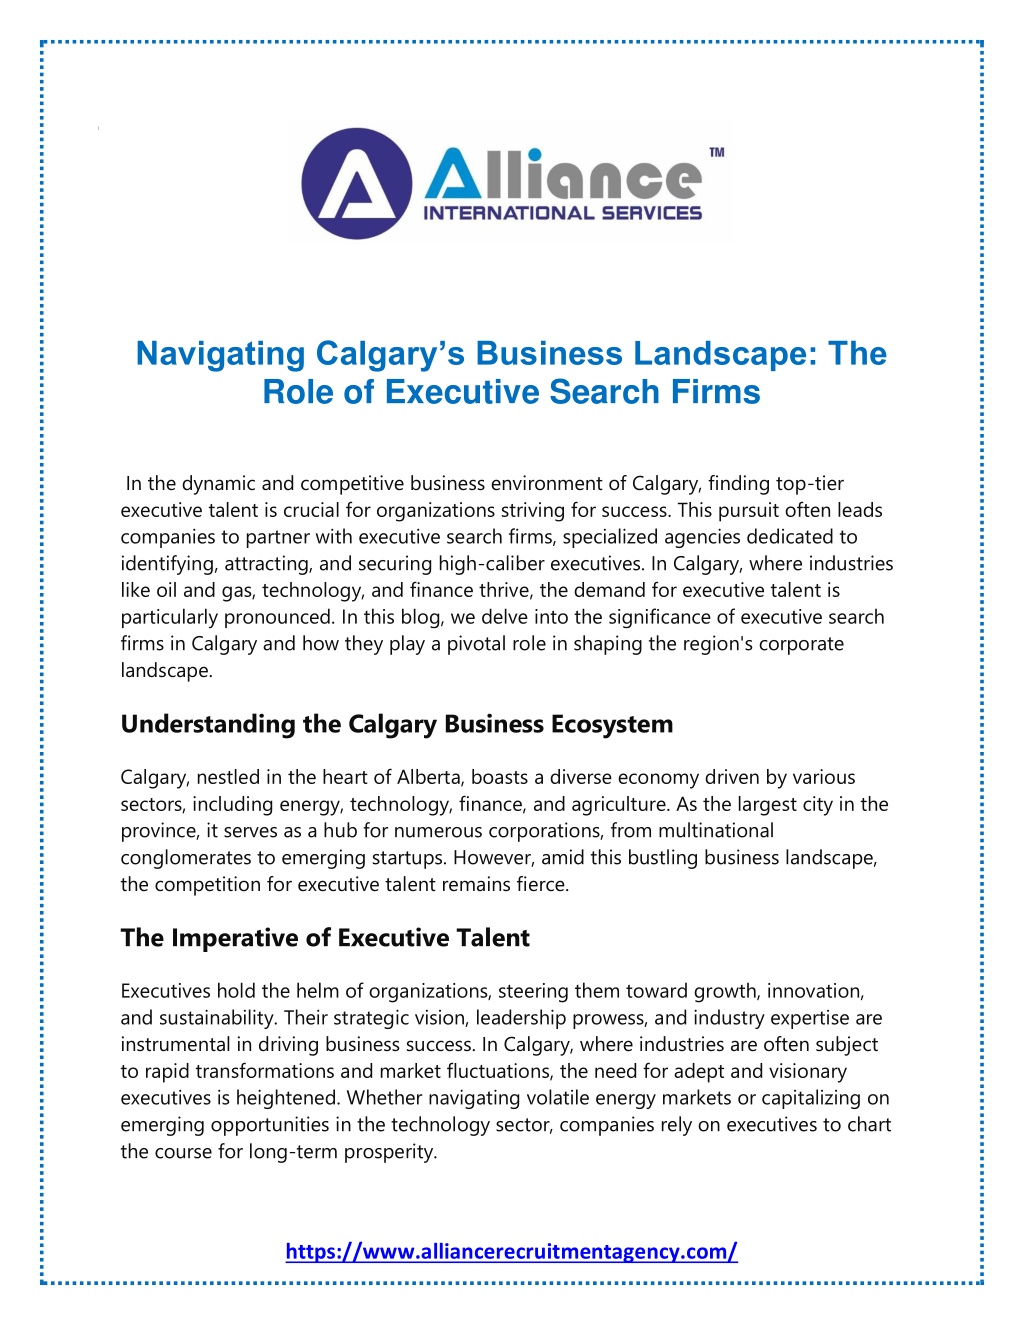 navigating calgary s business landscape the role l.w